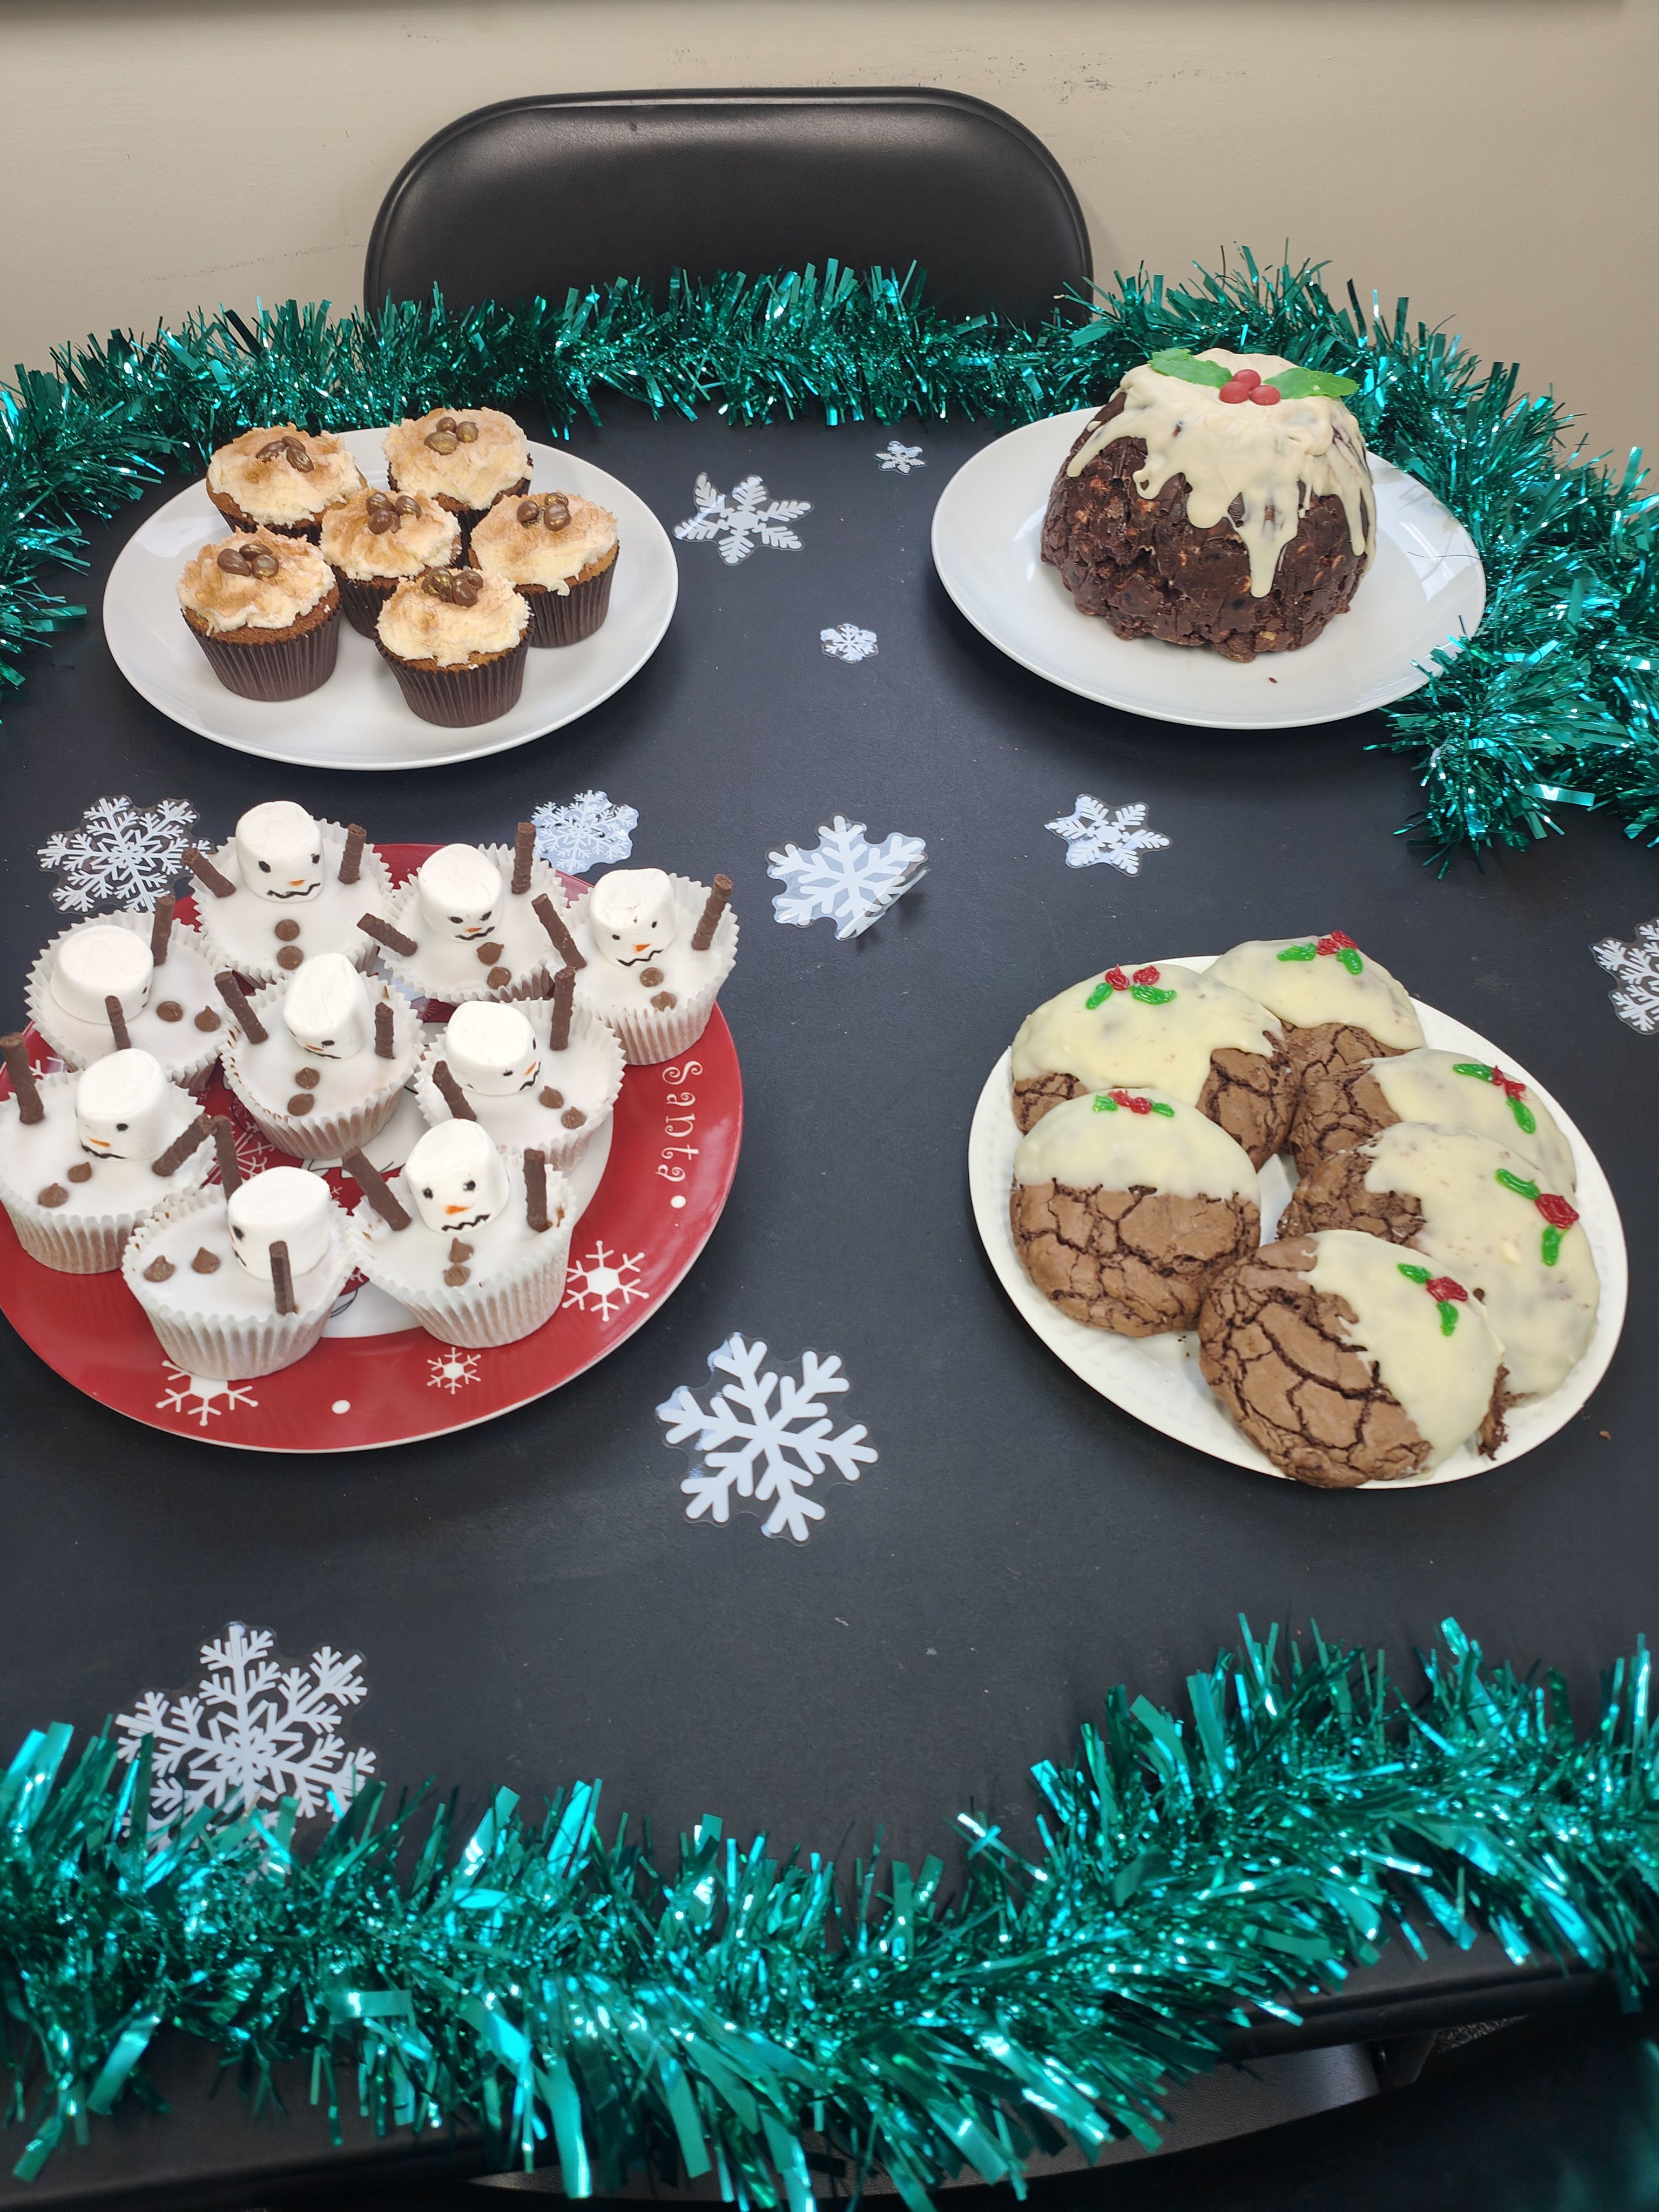 Picture of cakes that were baked for Christmas, featured on xcl website newsletter